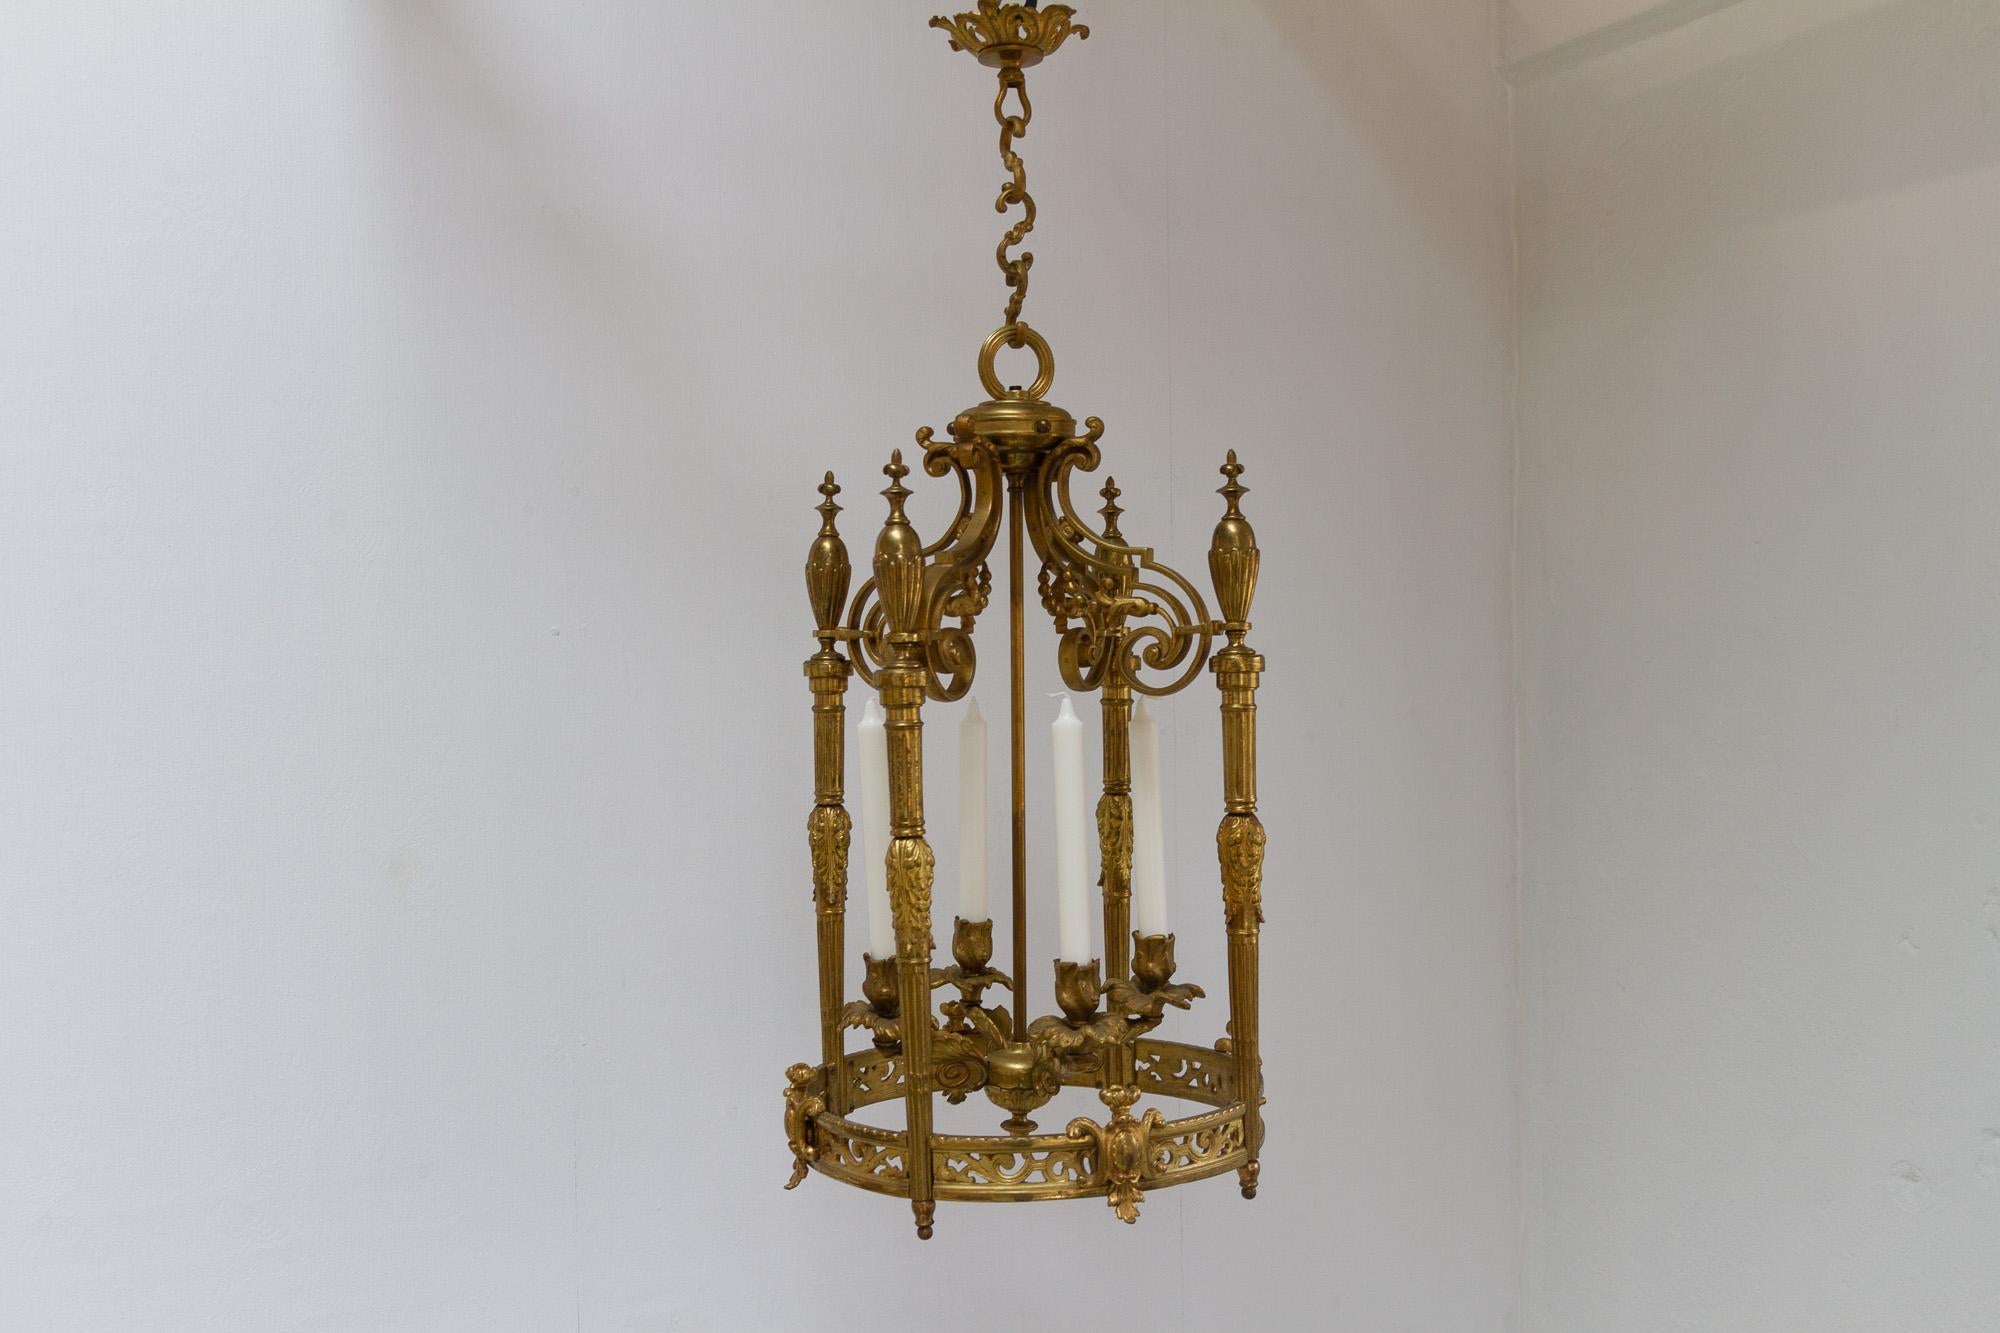 Antique French Napoleon III Gilded Bronze Chandelier, 1850s.
Elegant lantern shaped hanging chandelier for four candles. Suspended from a canopy with three linked chain. 
Gilt bronze (ormolu) with many intricate details. 
It has previously been